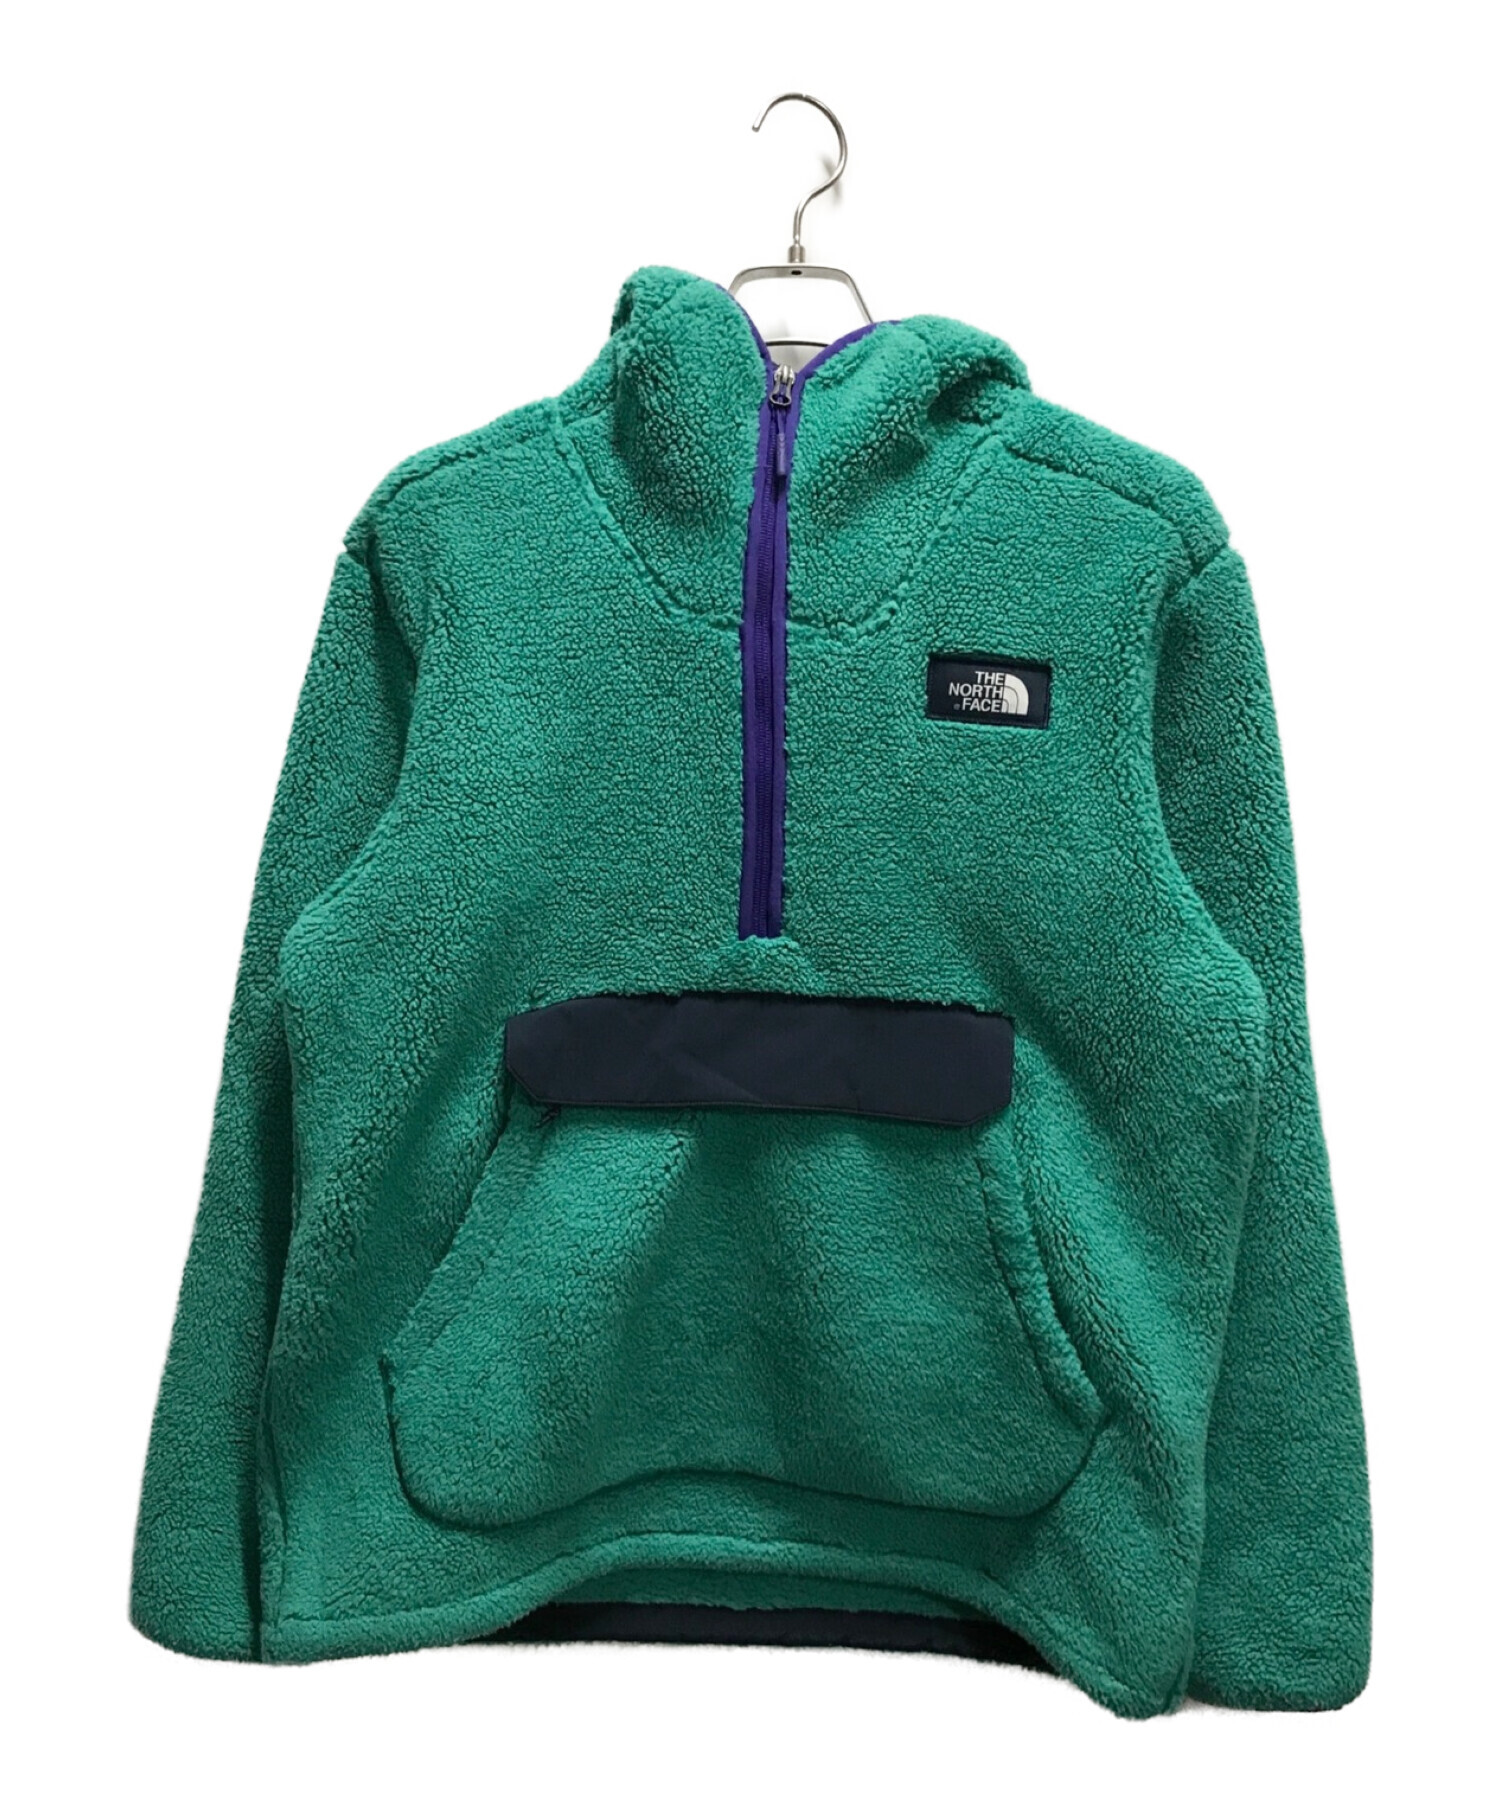 THE NORTH FACE (ザ ノース フェイス) CAMPSHIRE PULLOVER HOODIE グリーン サイズ:Ｍ